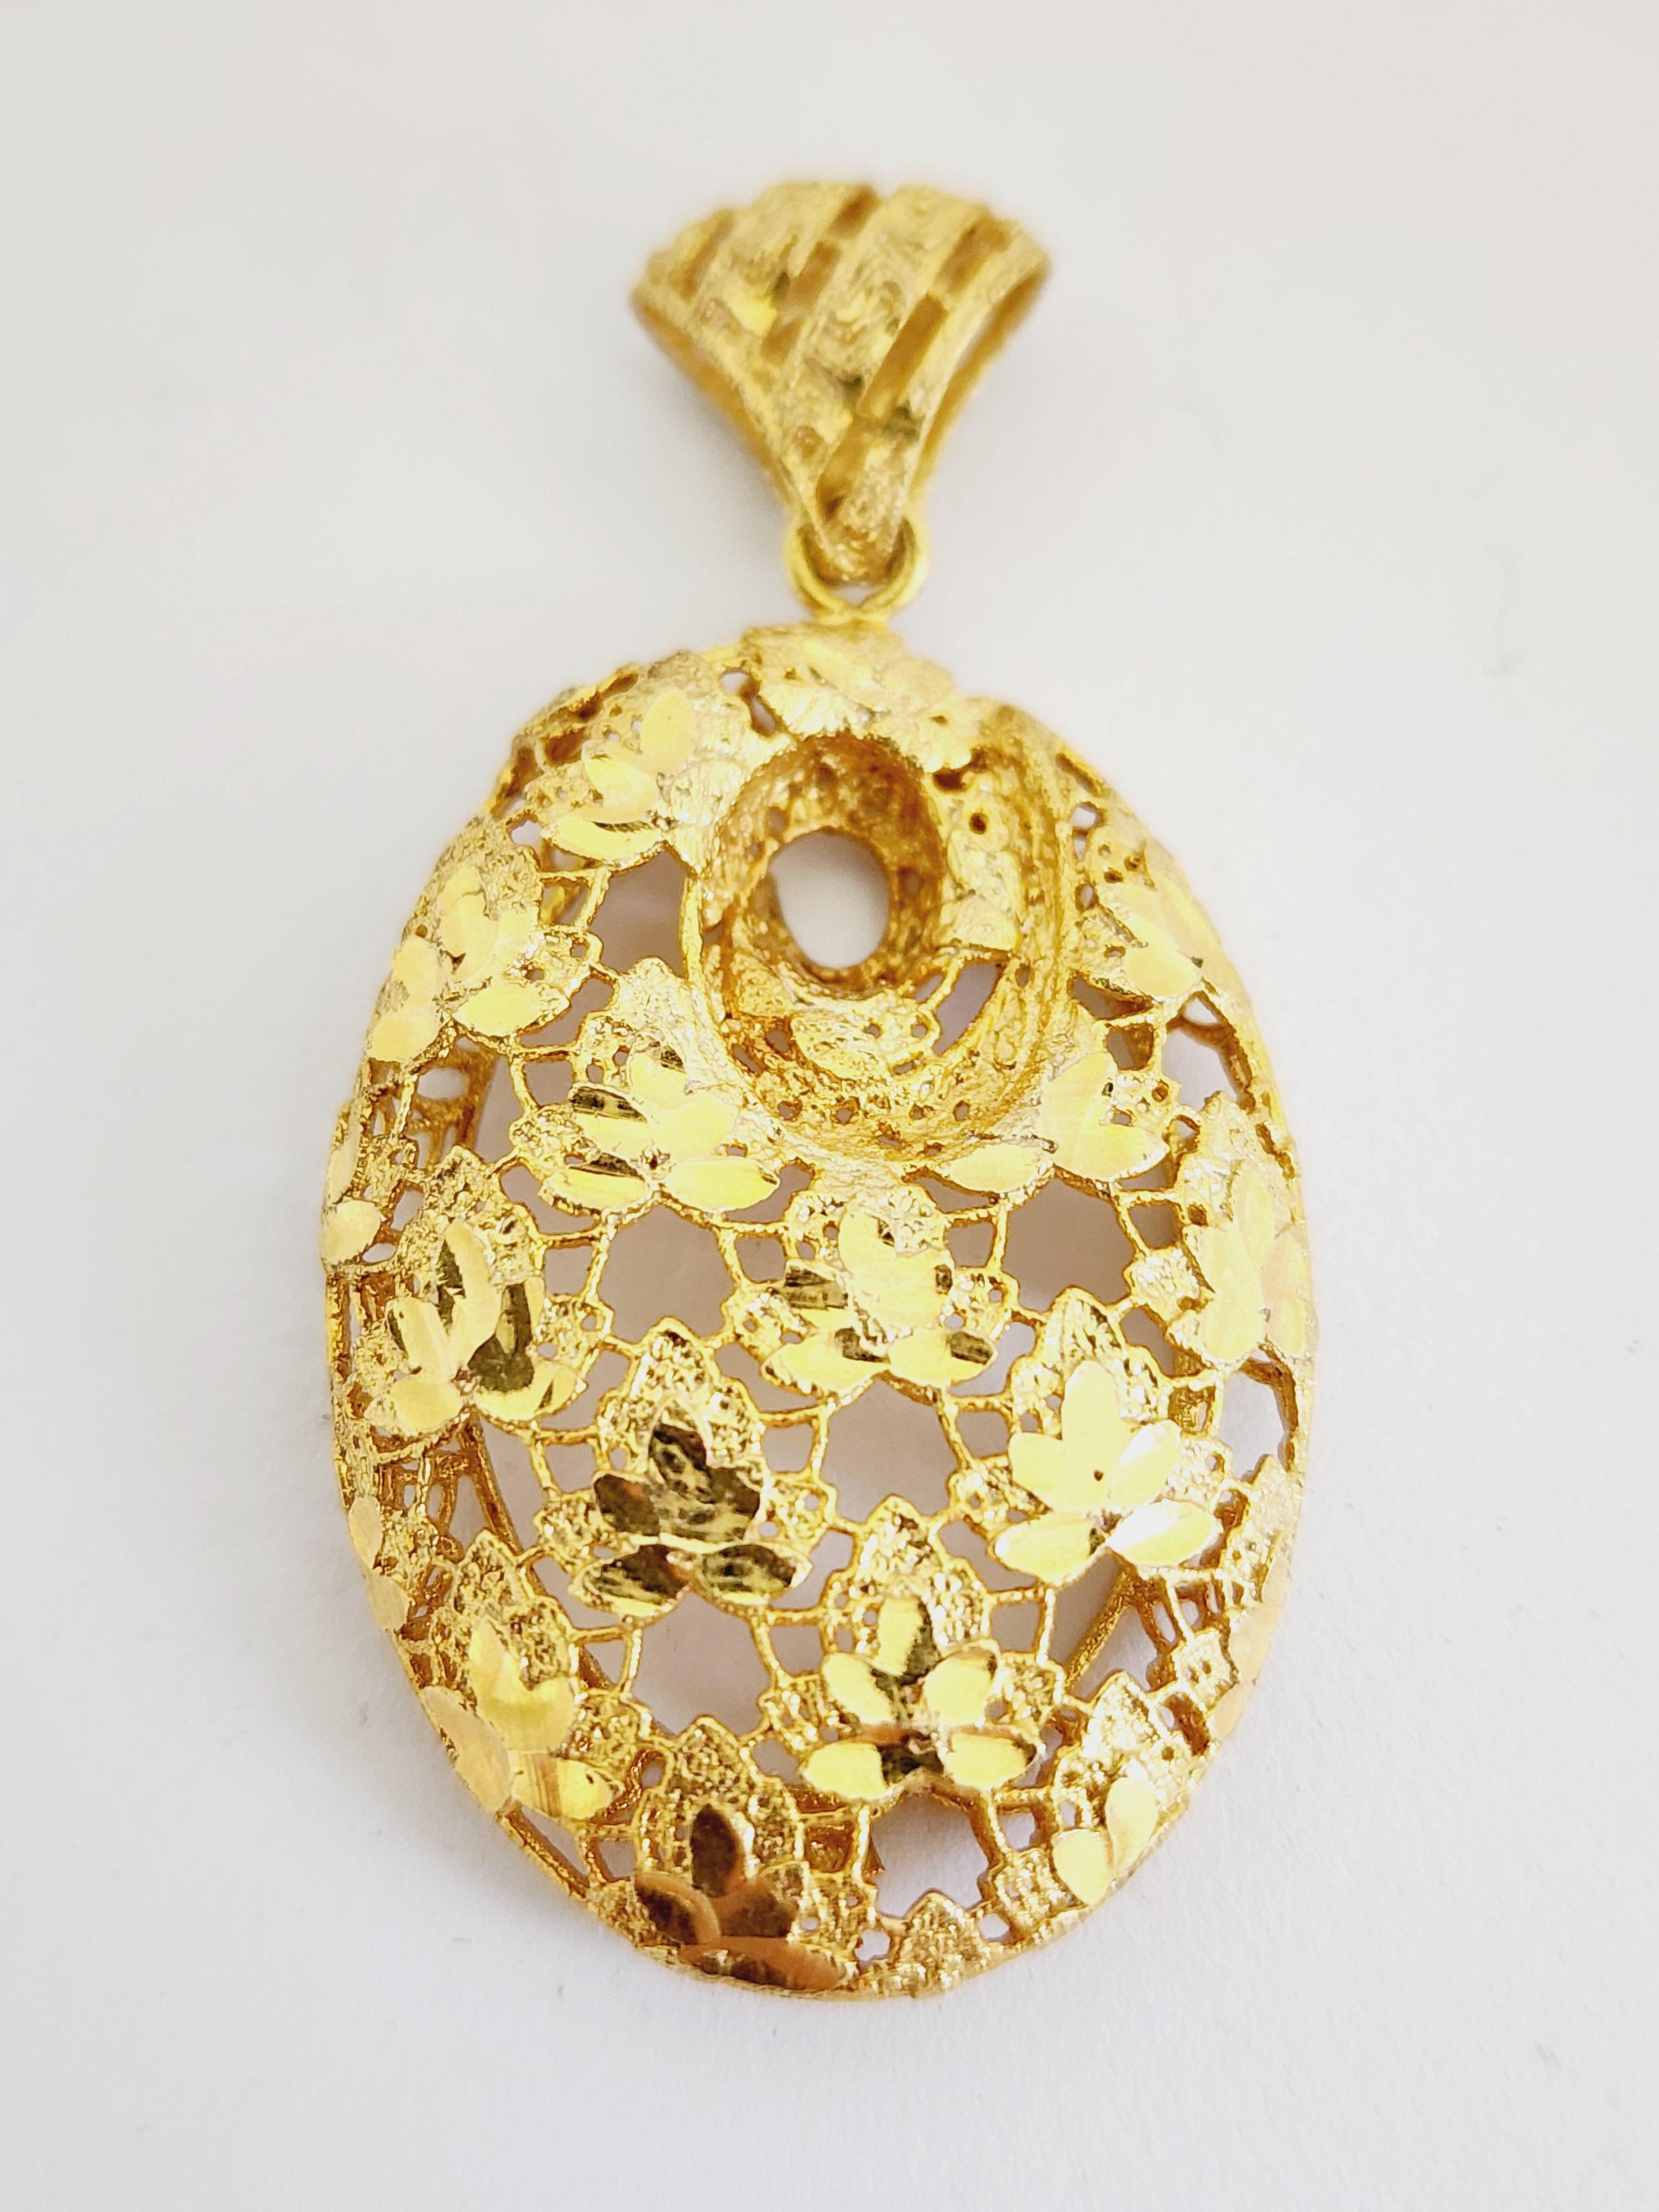 Oval shape pendant 14k yellow gold. 
Pendant measures approximately 1.75 inch length and 0.90 inch wide.

(Pendant Only - Chain sold separately)